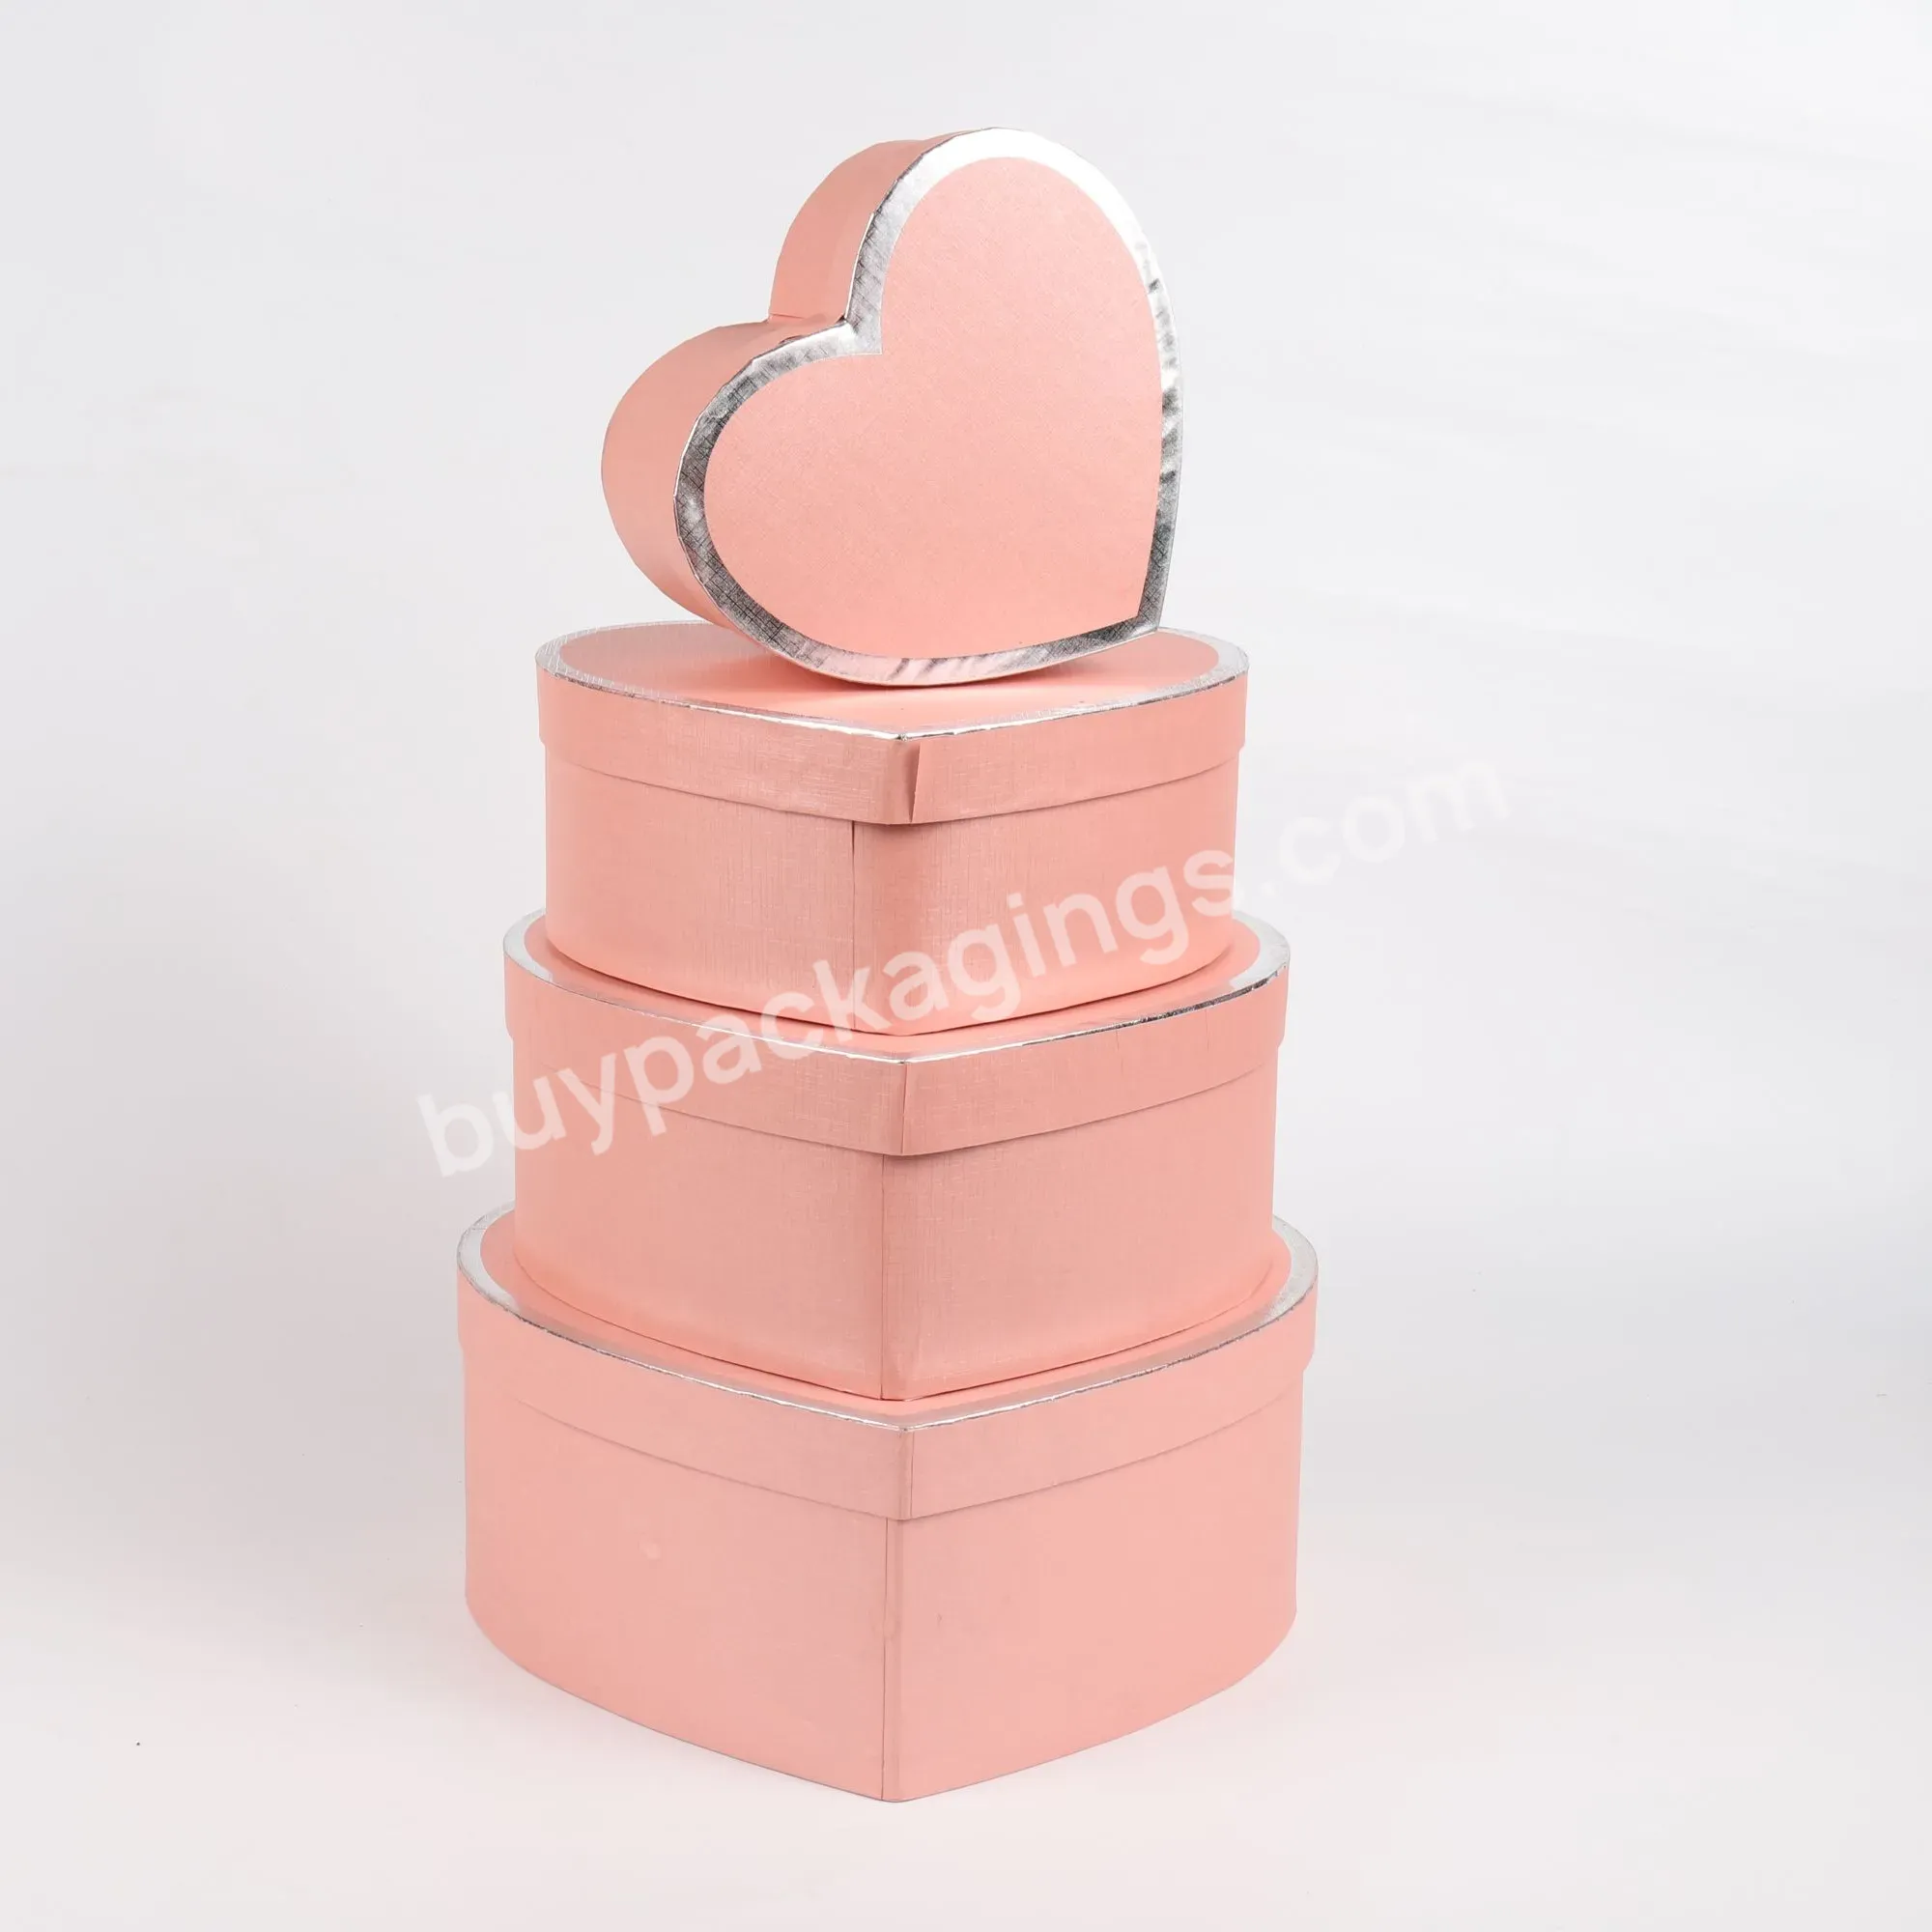 Luxury 4pcs/set Heart Shaped Gift Box Flower Gift Paper Boxes With Hot Stamping Edge